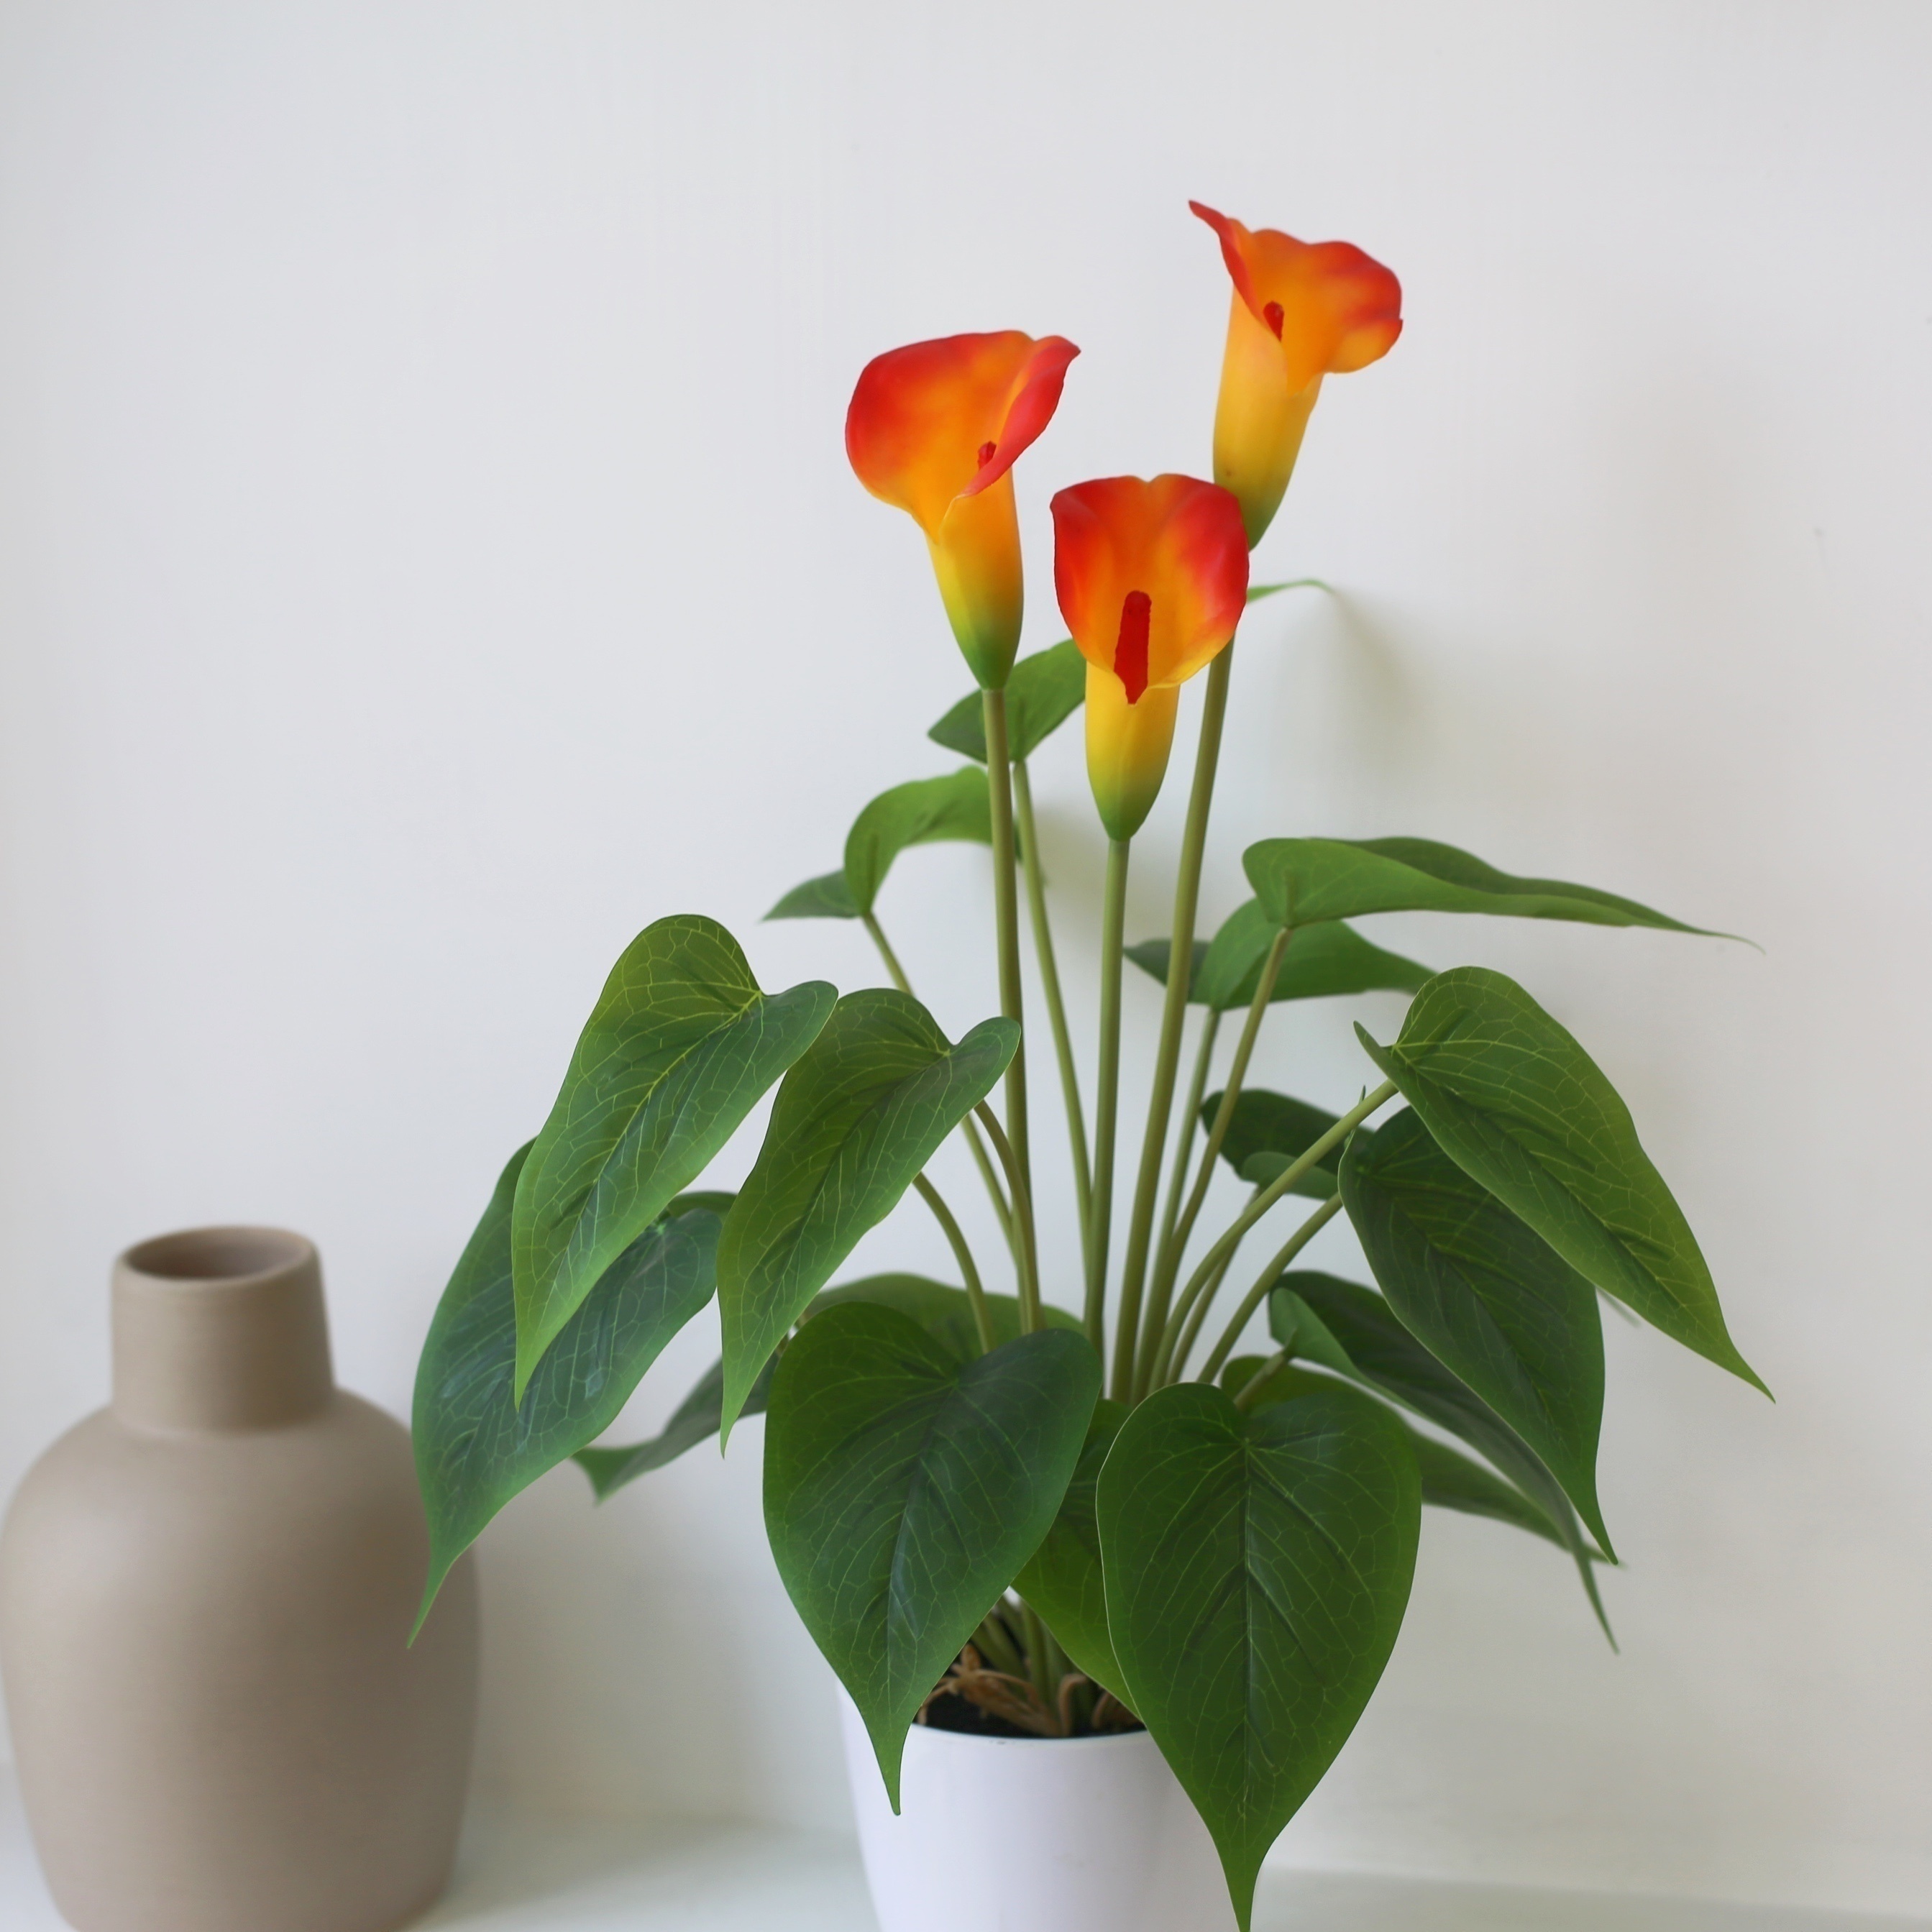 

Calla Lily Artificial Plant In White Pot: Contemporary Style, Plastic Material, Suitable For Home, Office, Indoor/outdoor Decorations - 20.8 Inches (orange Artificial Flowers)